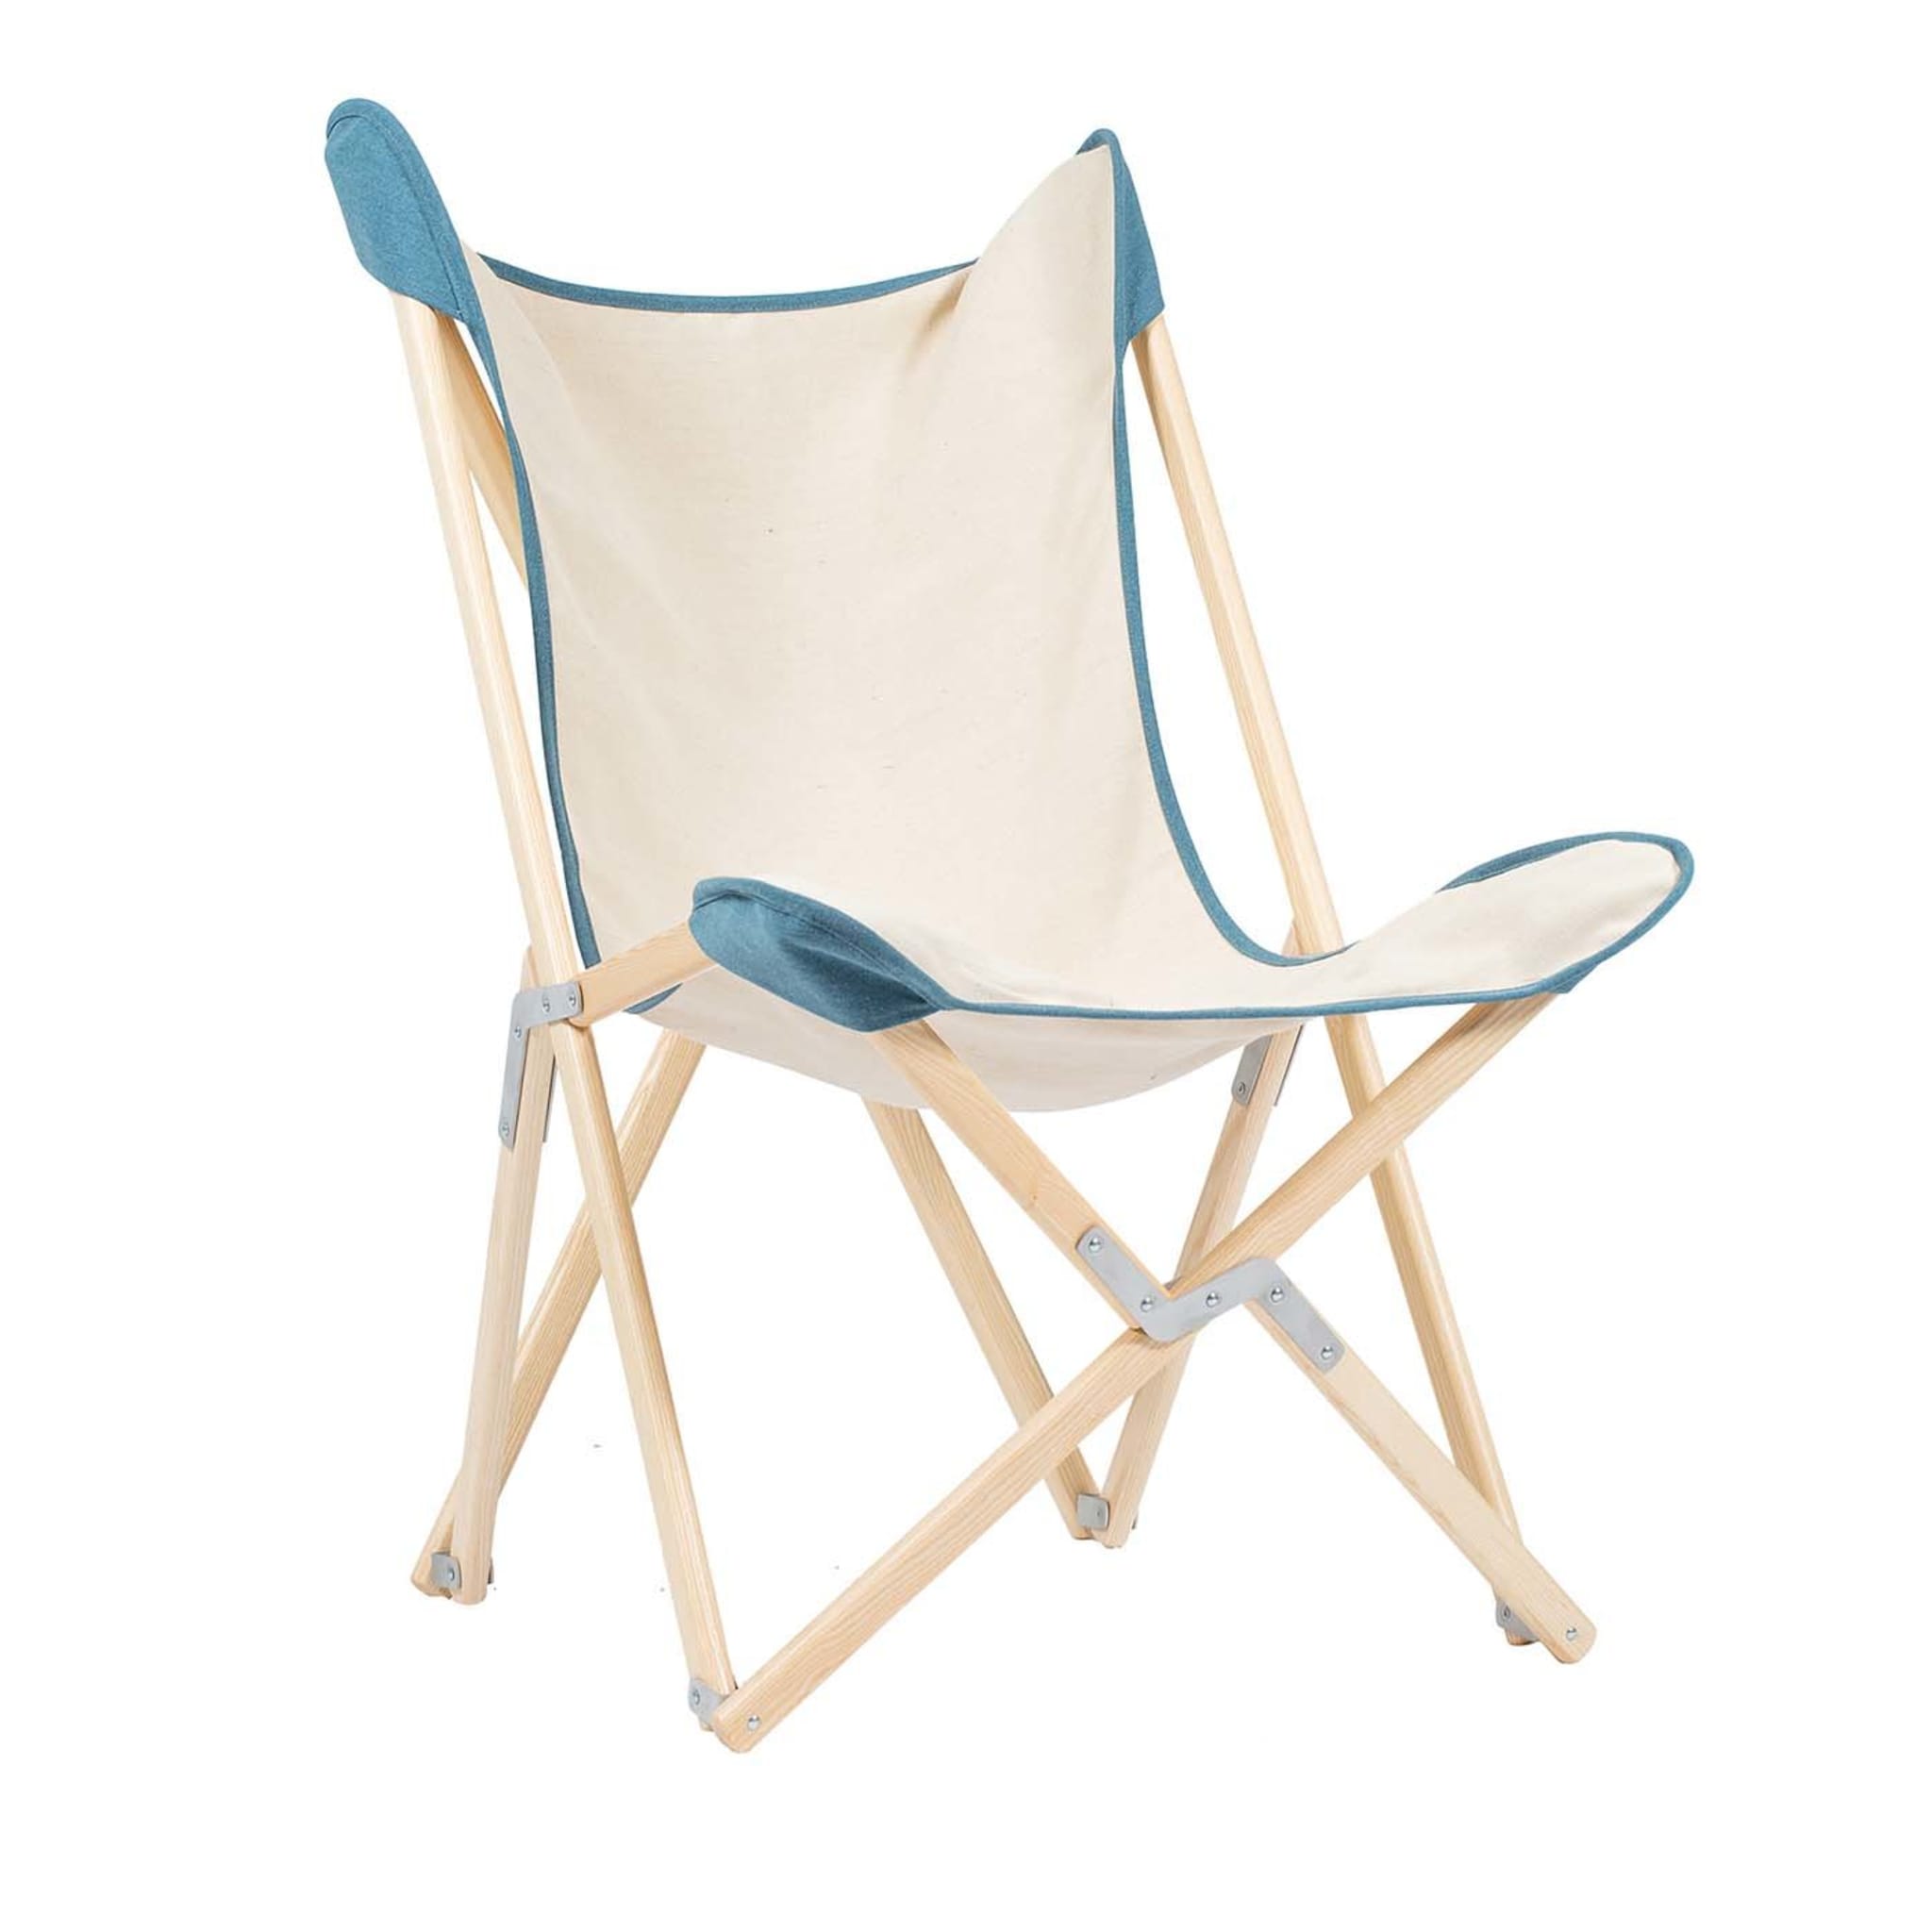 Tripolina Armchair in Cream and Teal Blue - Main view